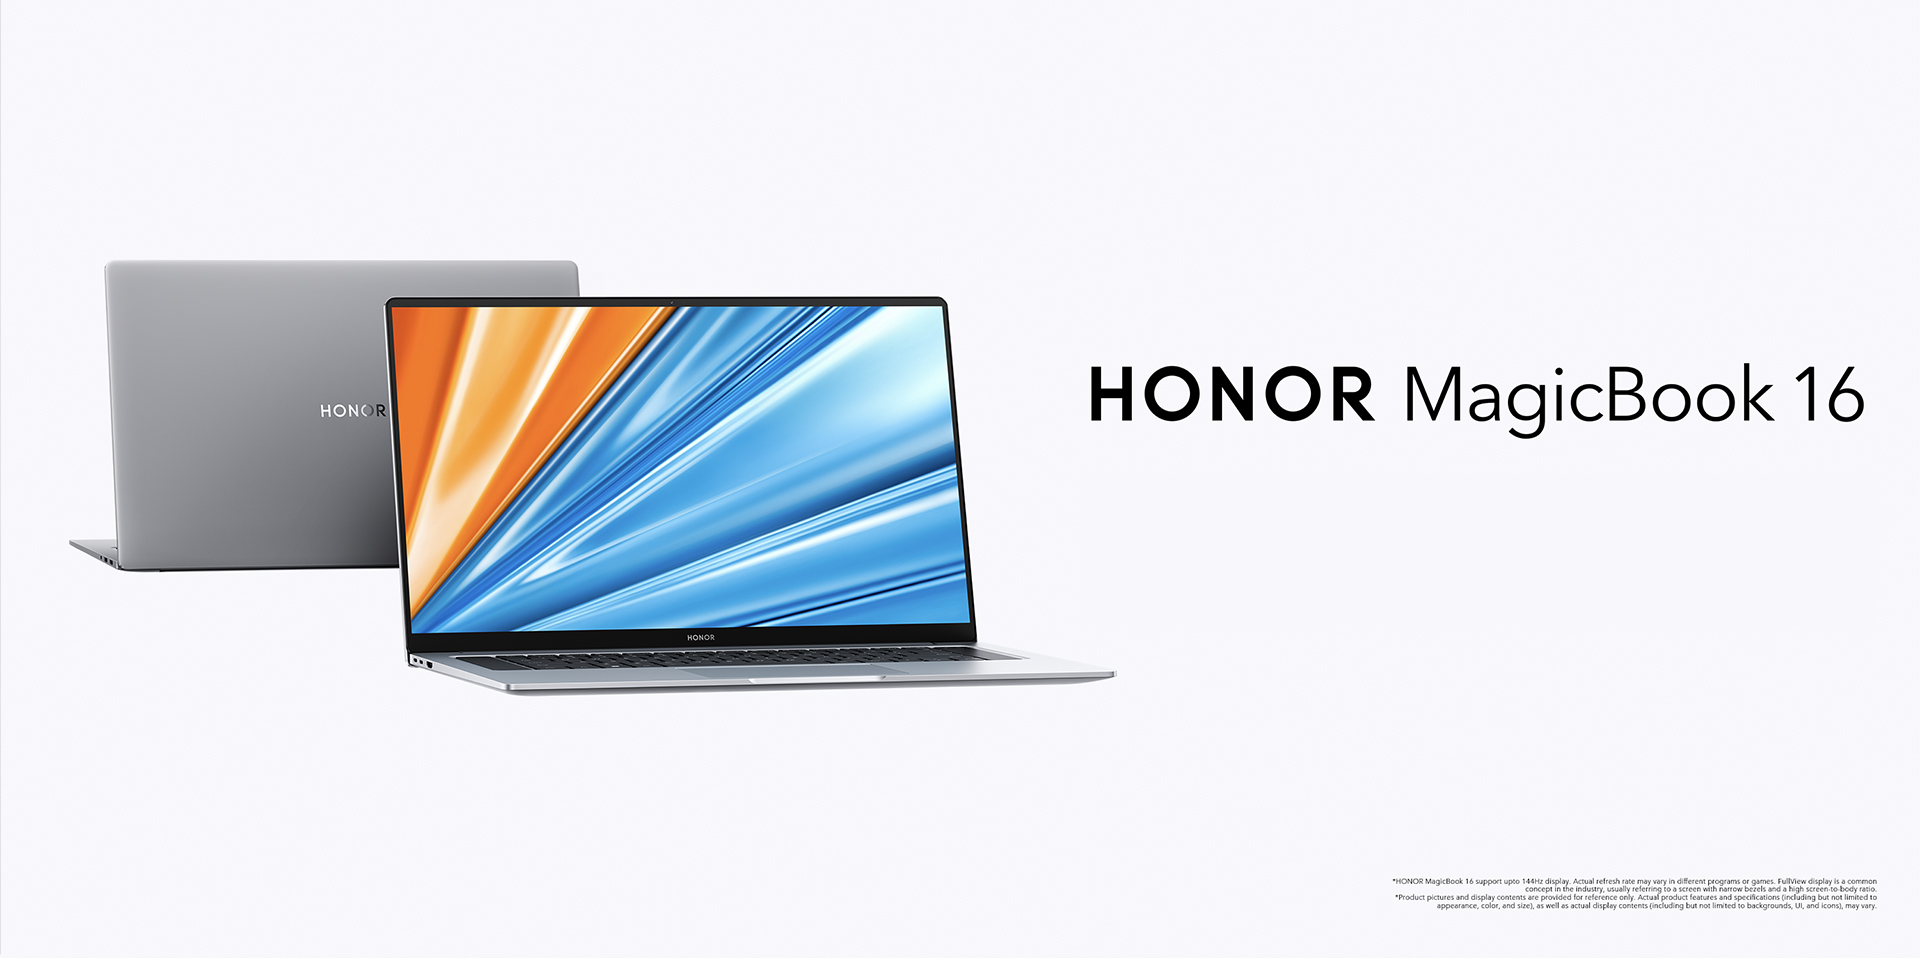 HONOR MagicBook 16: Powerfully Compact